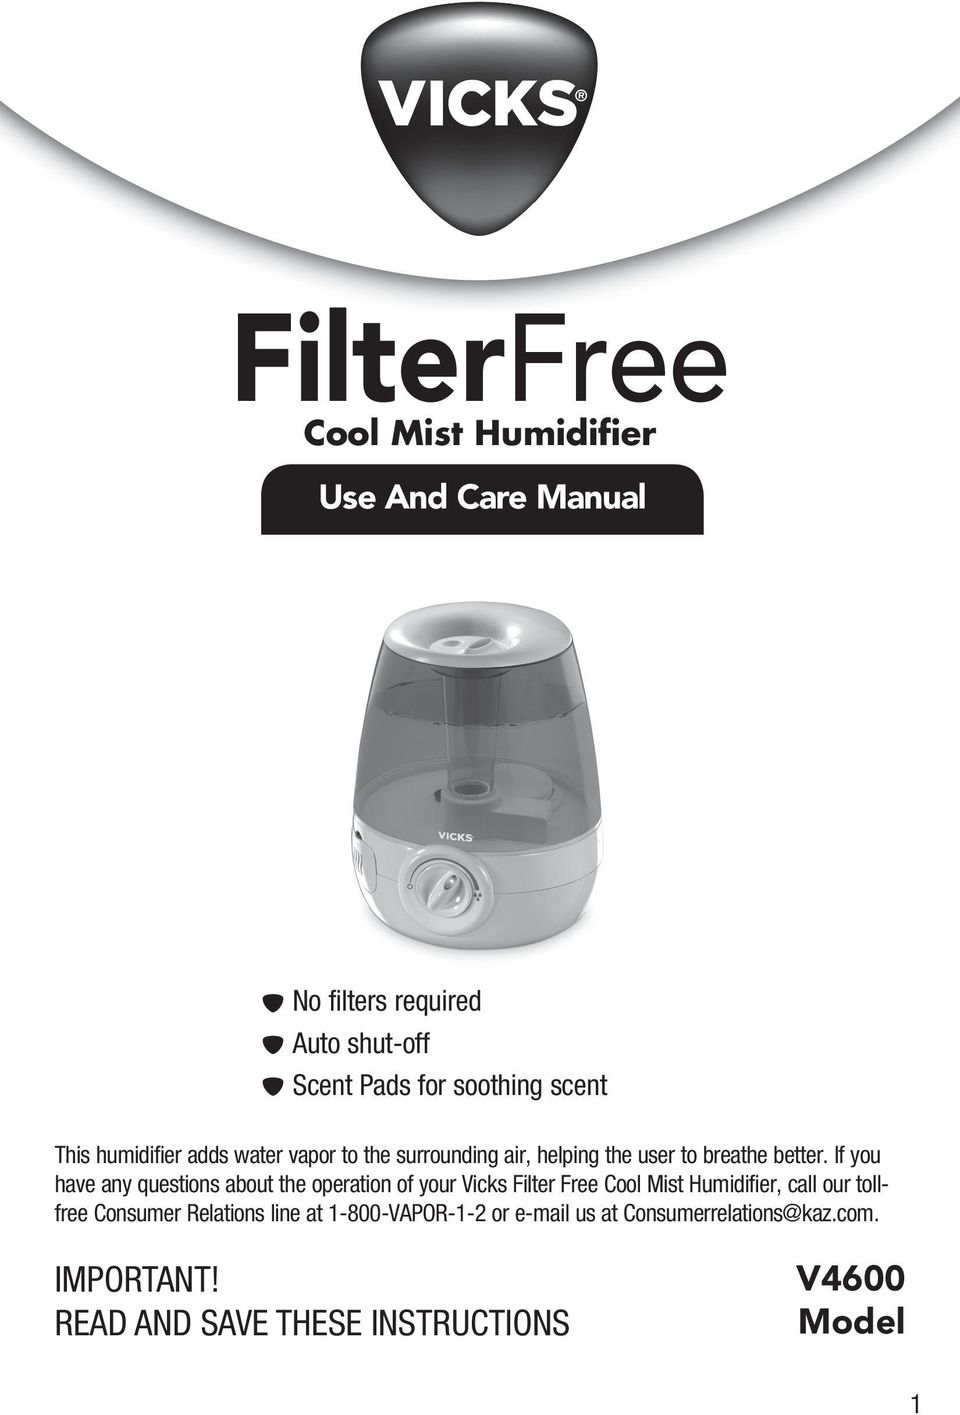 If you have any questions about the operation of your Vicks Filter Free Cool Mist Humidifier, call our tollfree